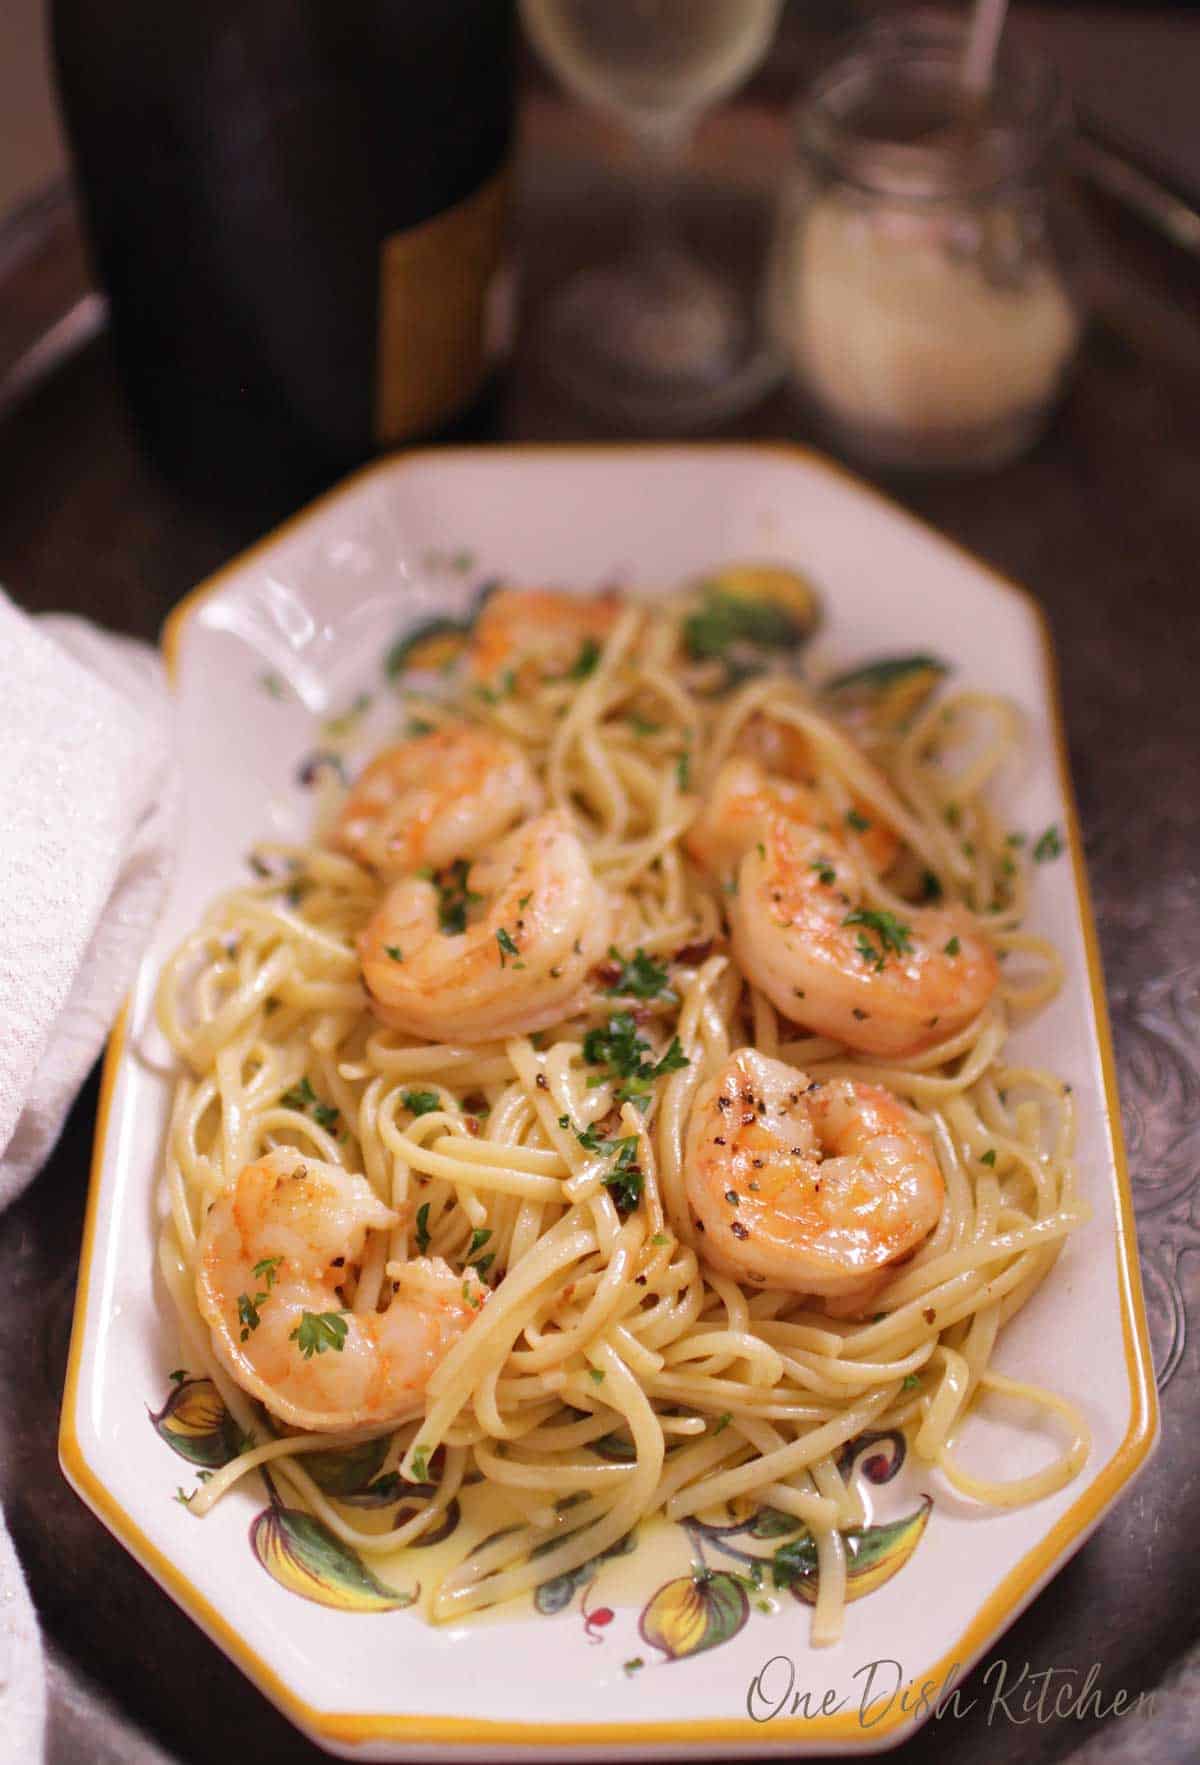 An overhead view of a plate of spaghetti with shrimp on a tray next to a small jar of parmesan cheese and a glass of champagne.